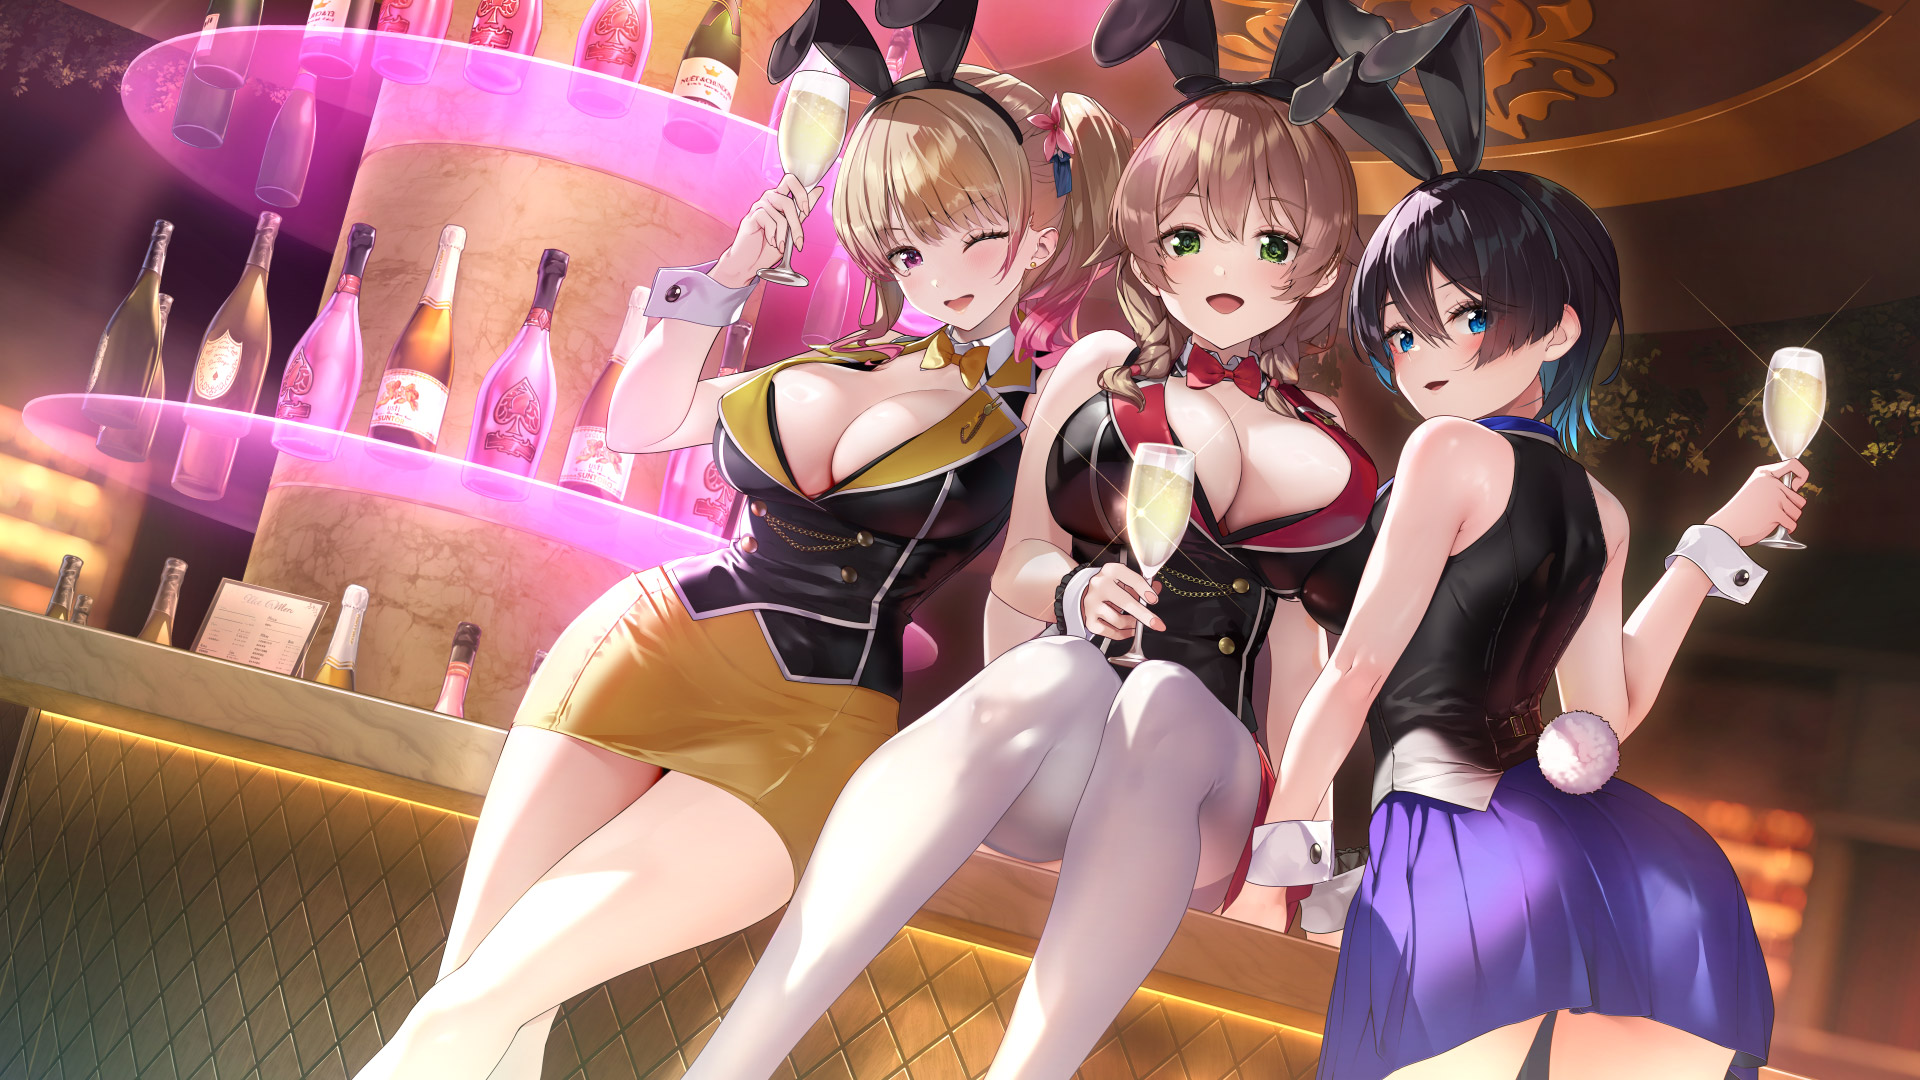 Anime 1920x1080 Bunny Garden bunny ears huge breasts stockings white stockings bottles group of women no bra women trio thigh-highs looking at viewer wink looking back bunny girl women indoors Yamacchi ass bar champagne one eye closed bunny tail cleavage open mouth wine glass smiling cup animal ears